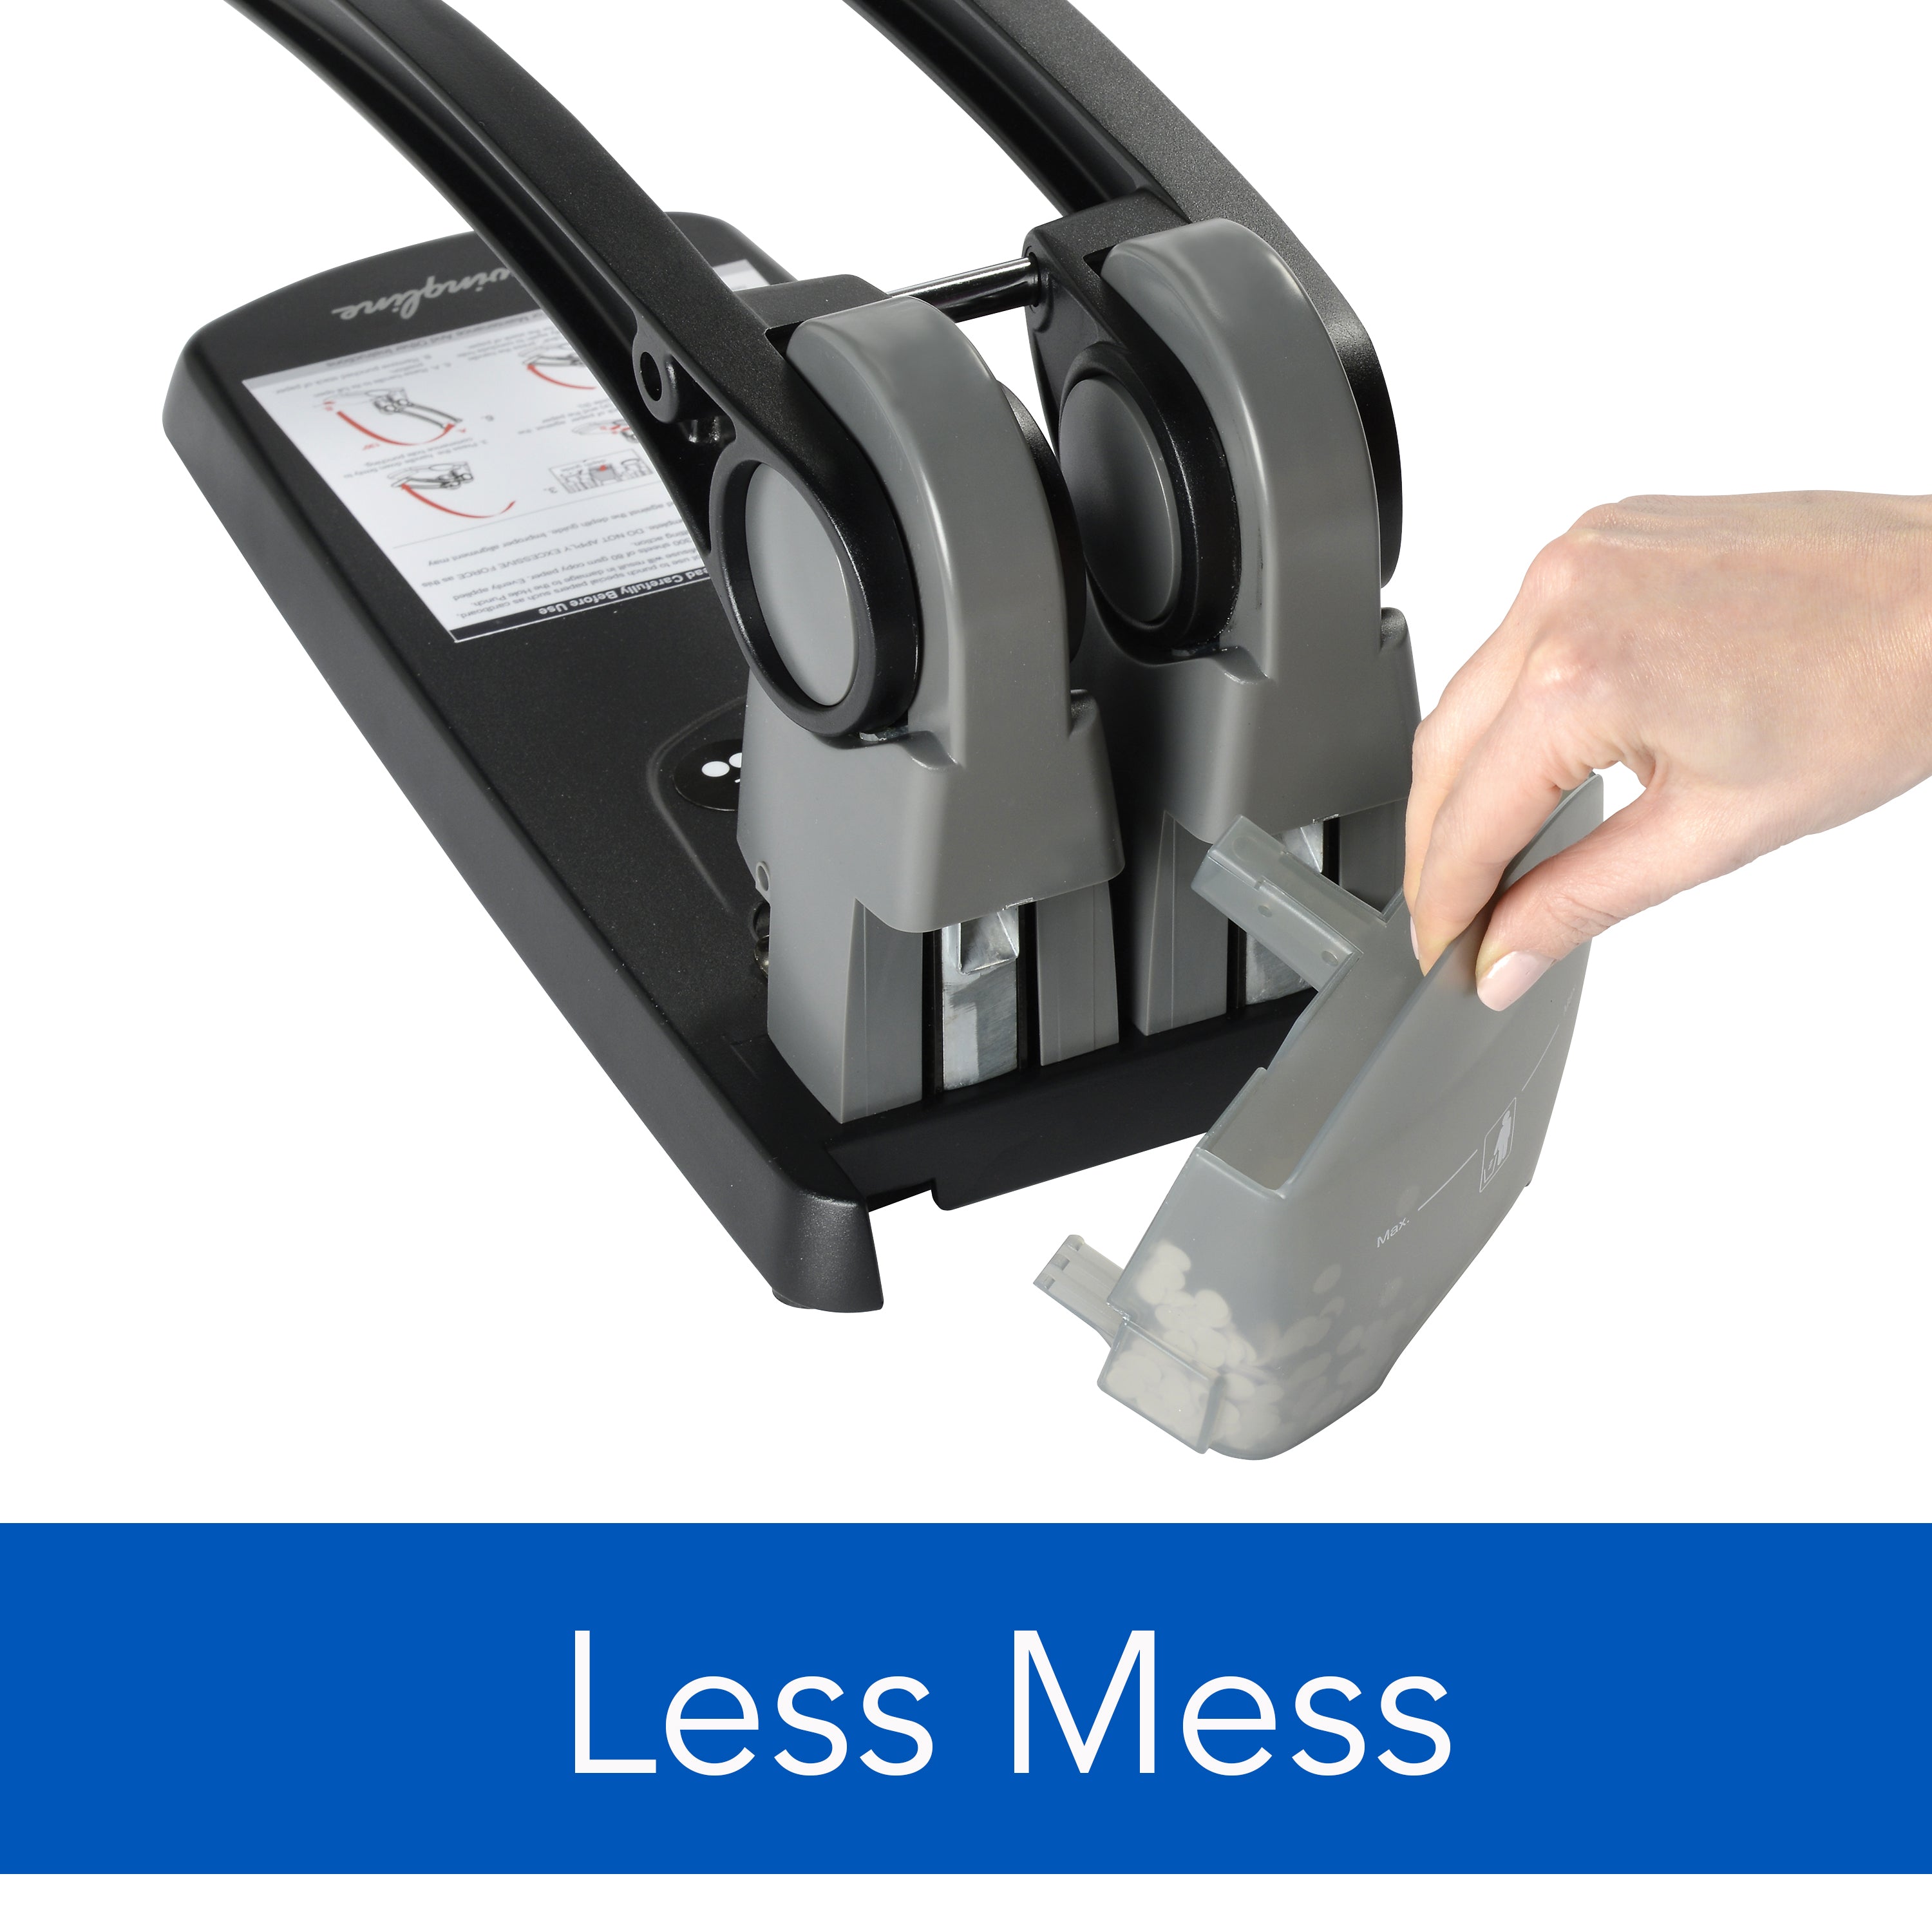 Multi hole punch – Time/system